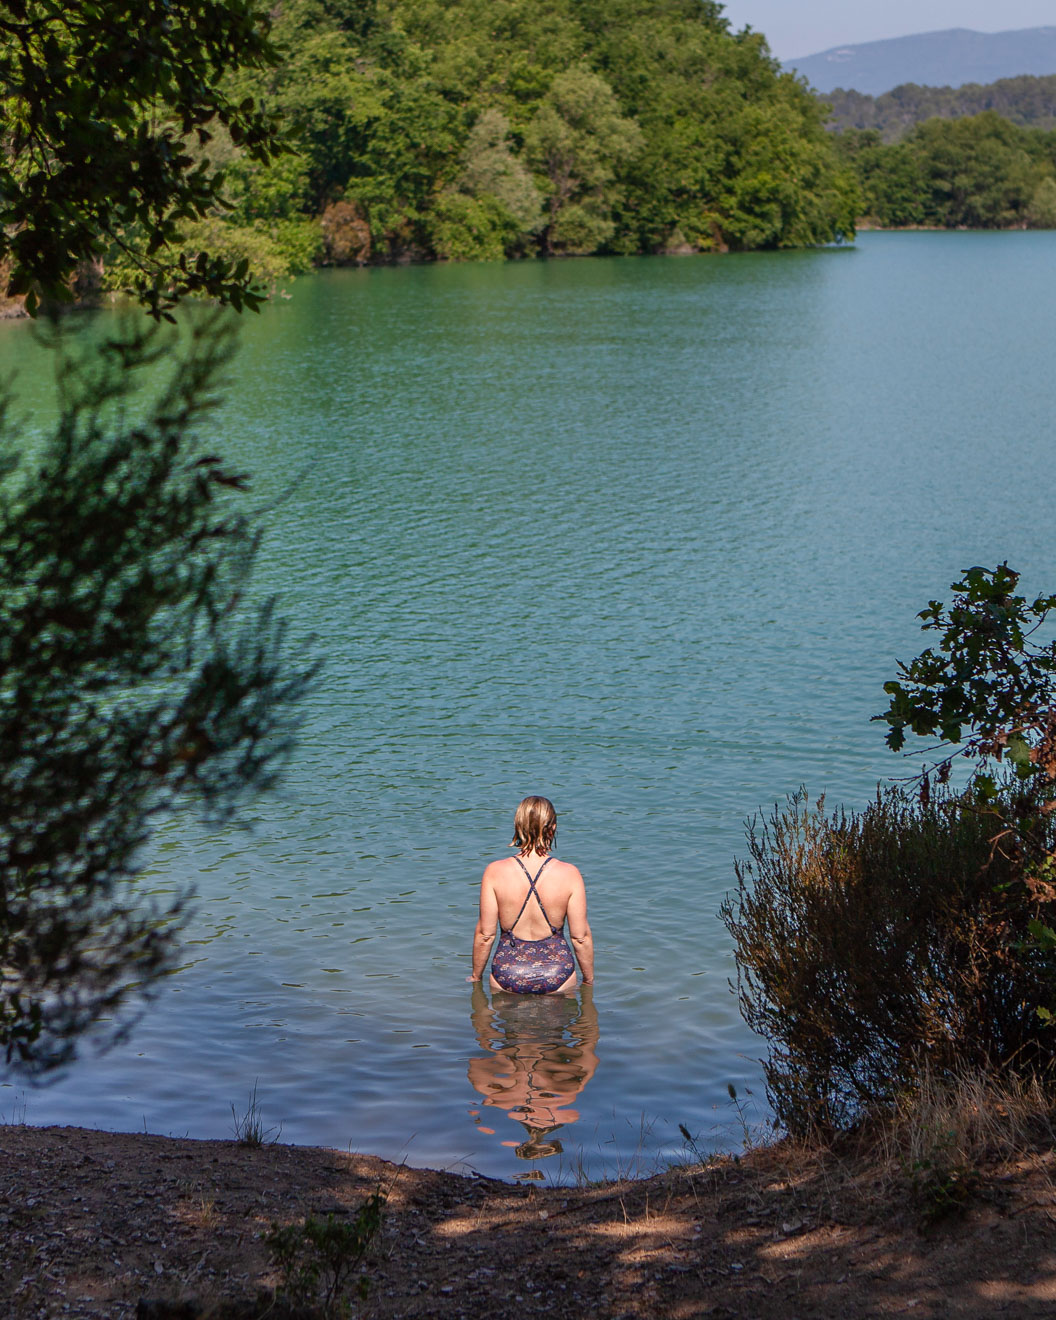 Photograph of a blond woman in a swimsuit entering an empty lake